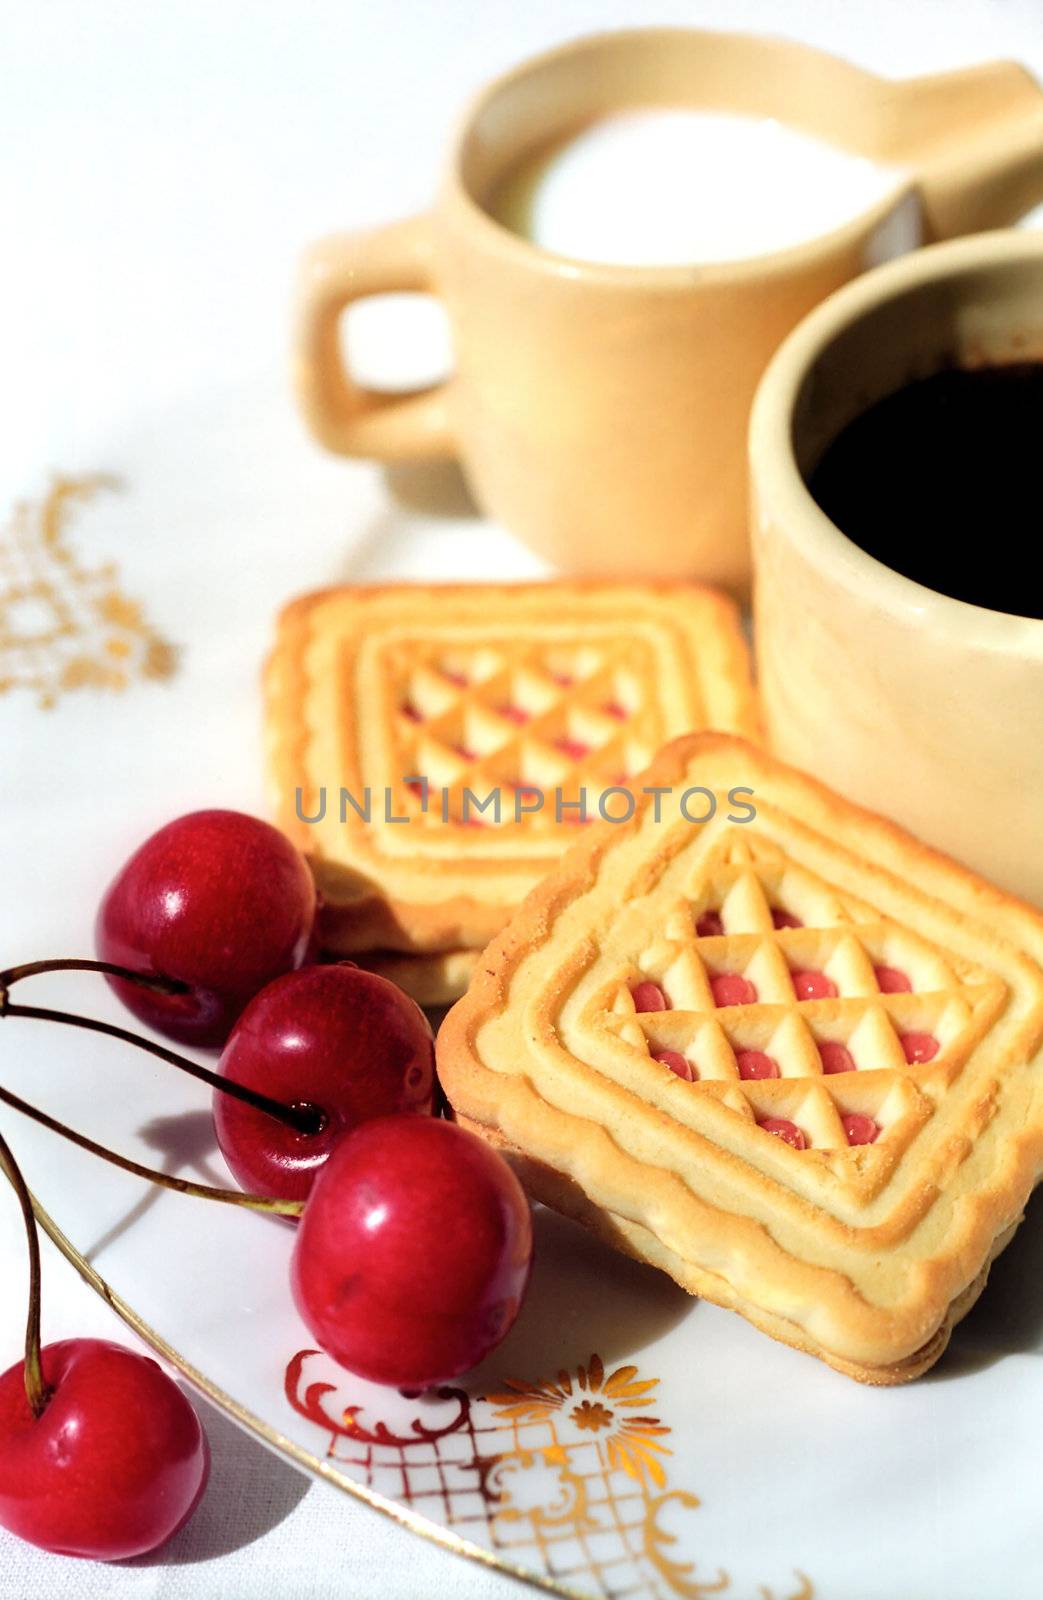 Cherry and biscuit on the plate with cups of coffee and cream